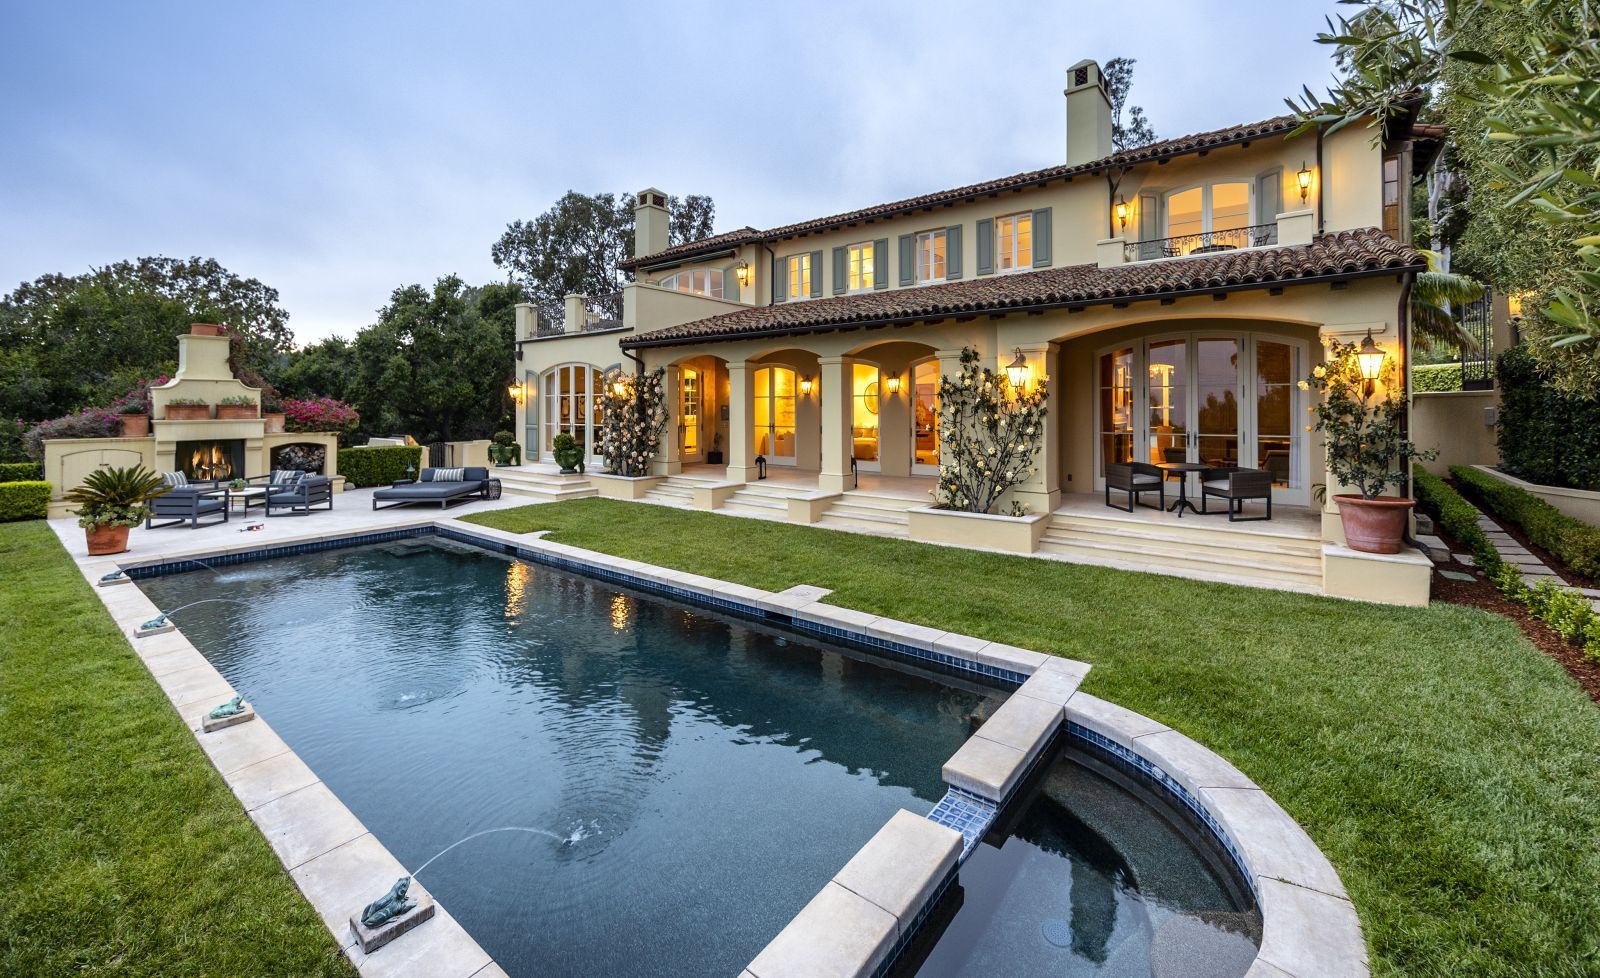 The backyard of a luxury home with a pool, lawn, and fireplace in the foreground